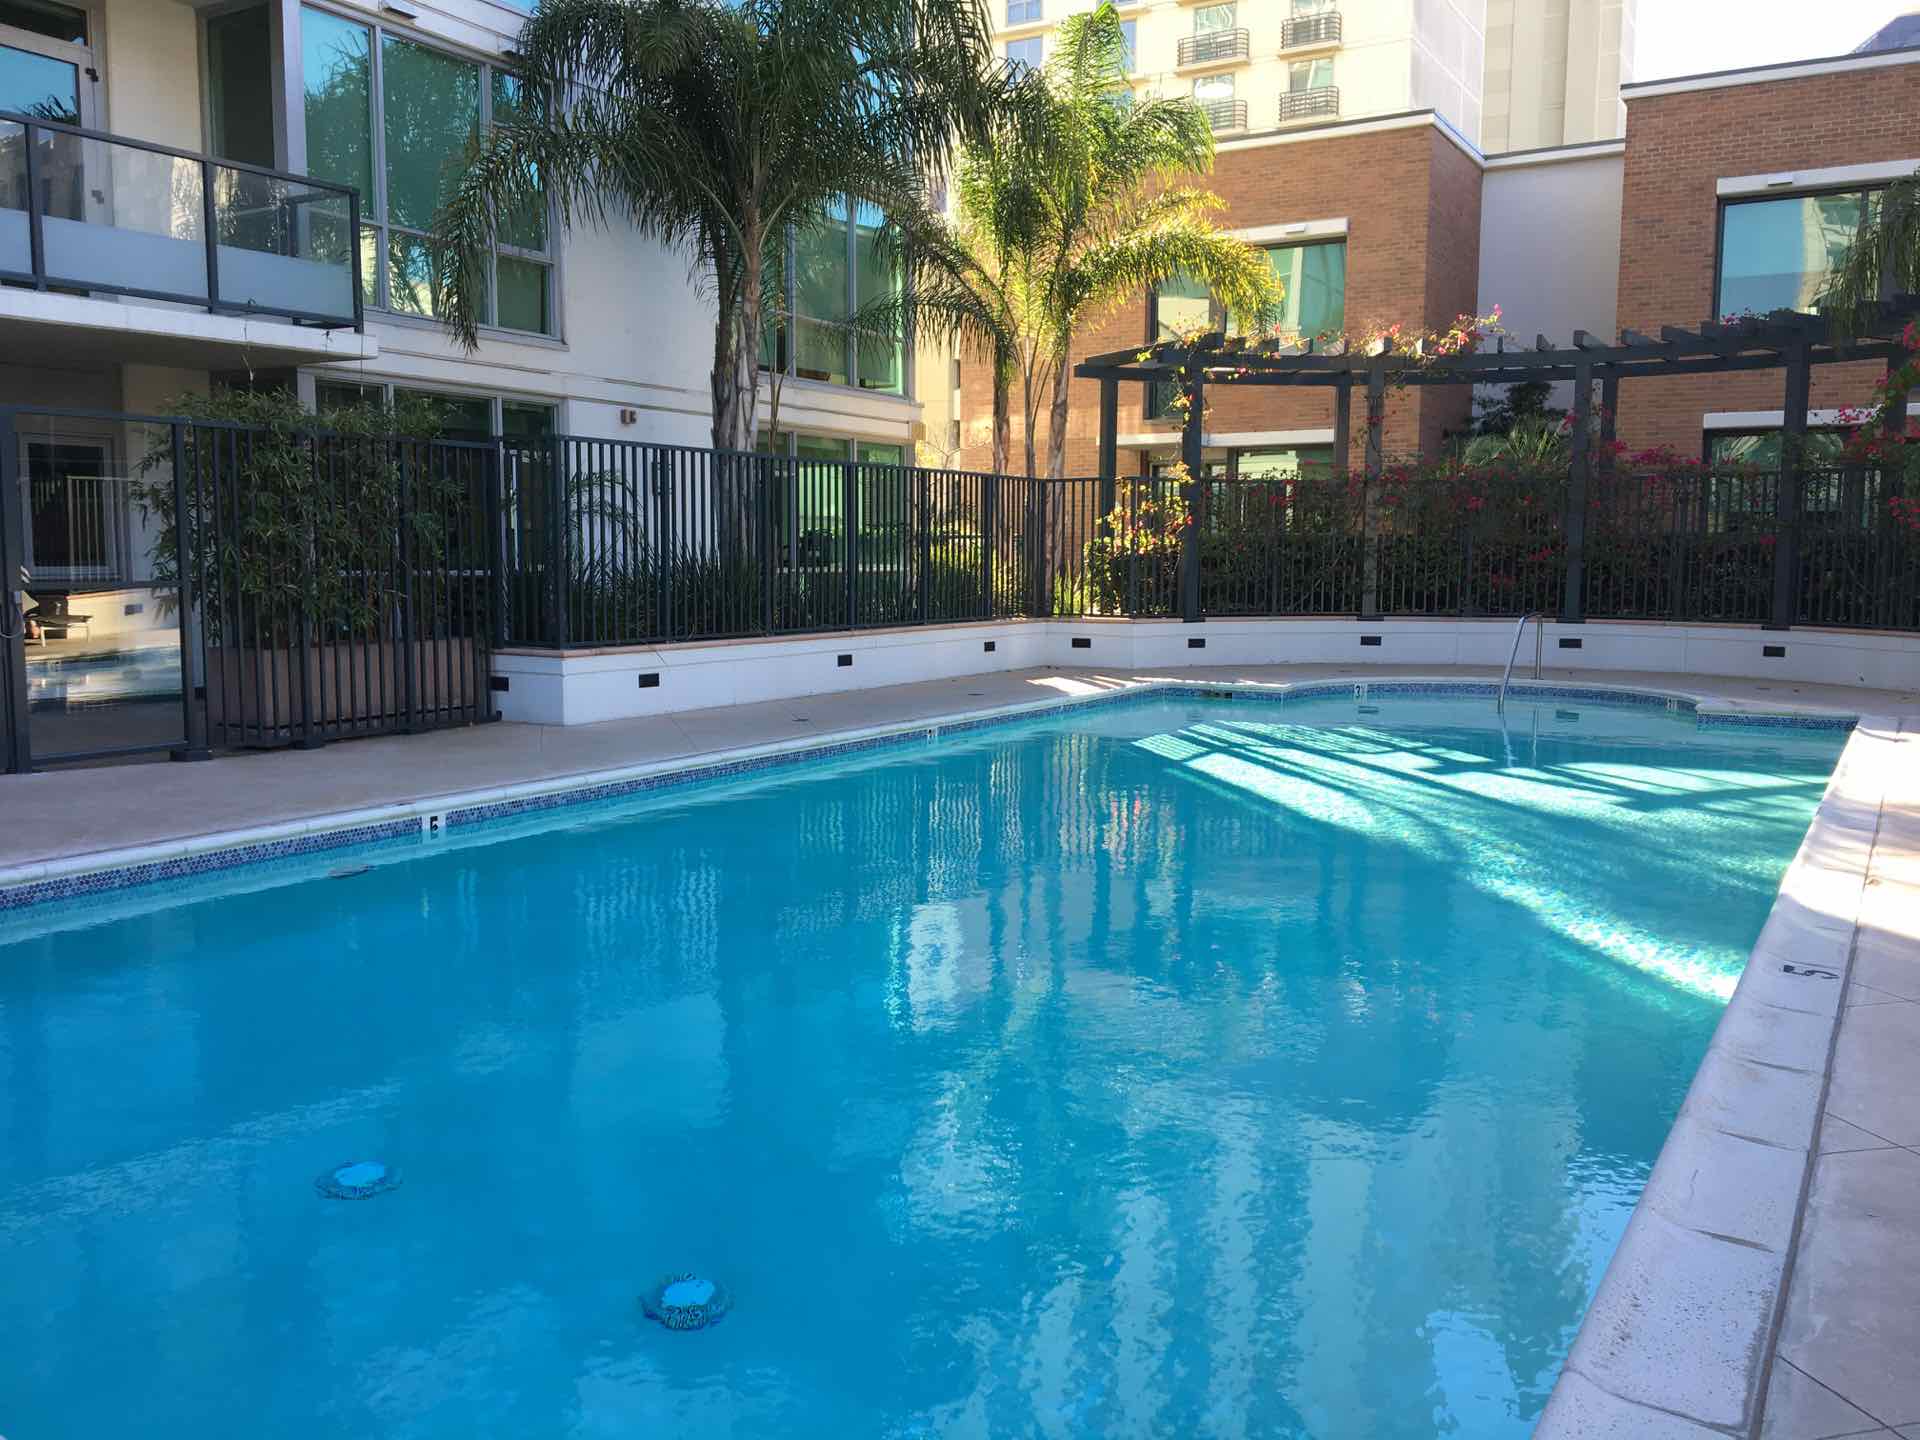 Pool at The Legend condo building in San Diego downtown